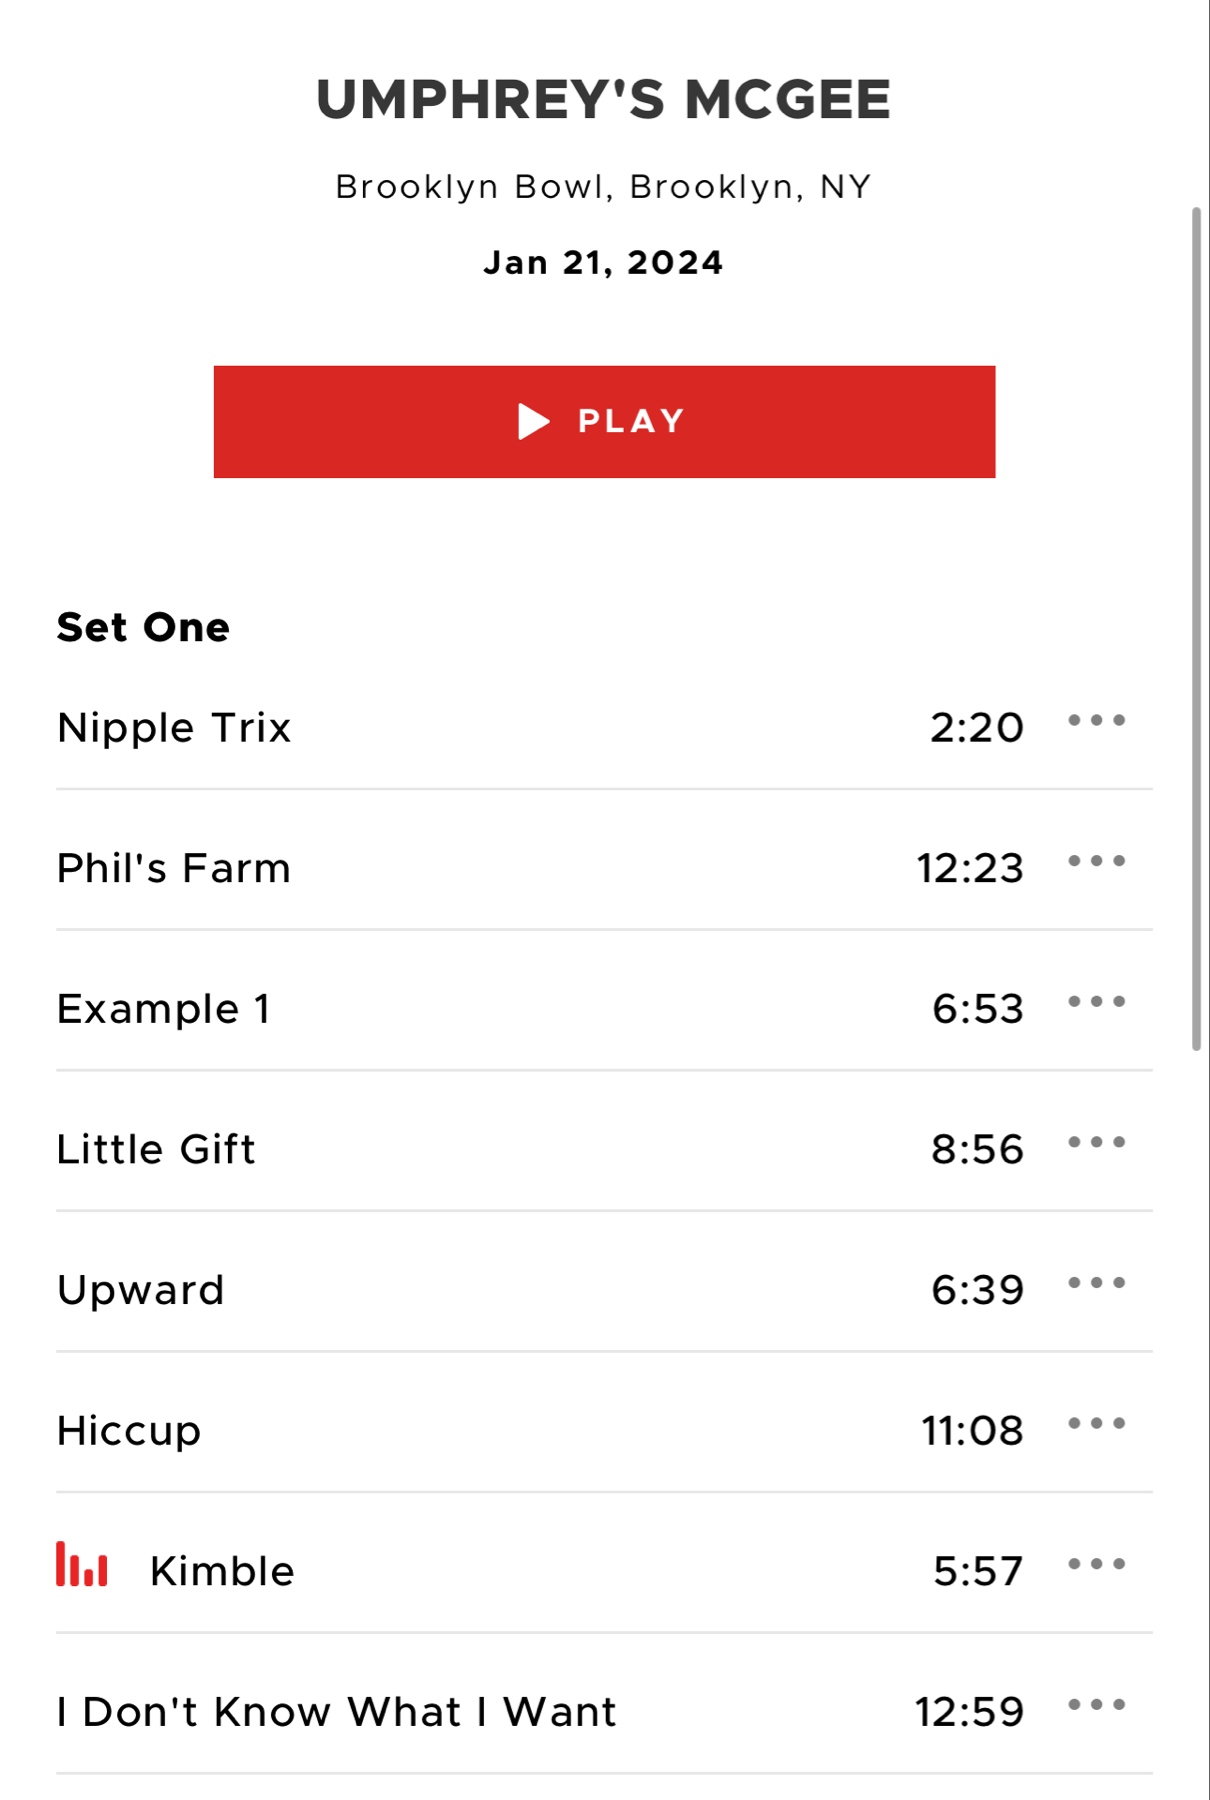 The image shows a list of songs from a setlist for the band Umphrey’s McGee at the Brooklyn Bowl in Brooklyn, NY, on January 21, 2024. Each song title is accompanied by its duration, with “Kim